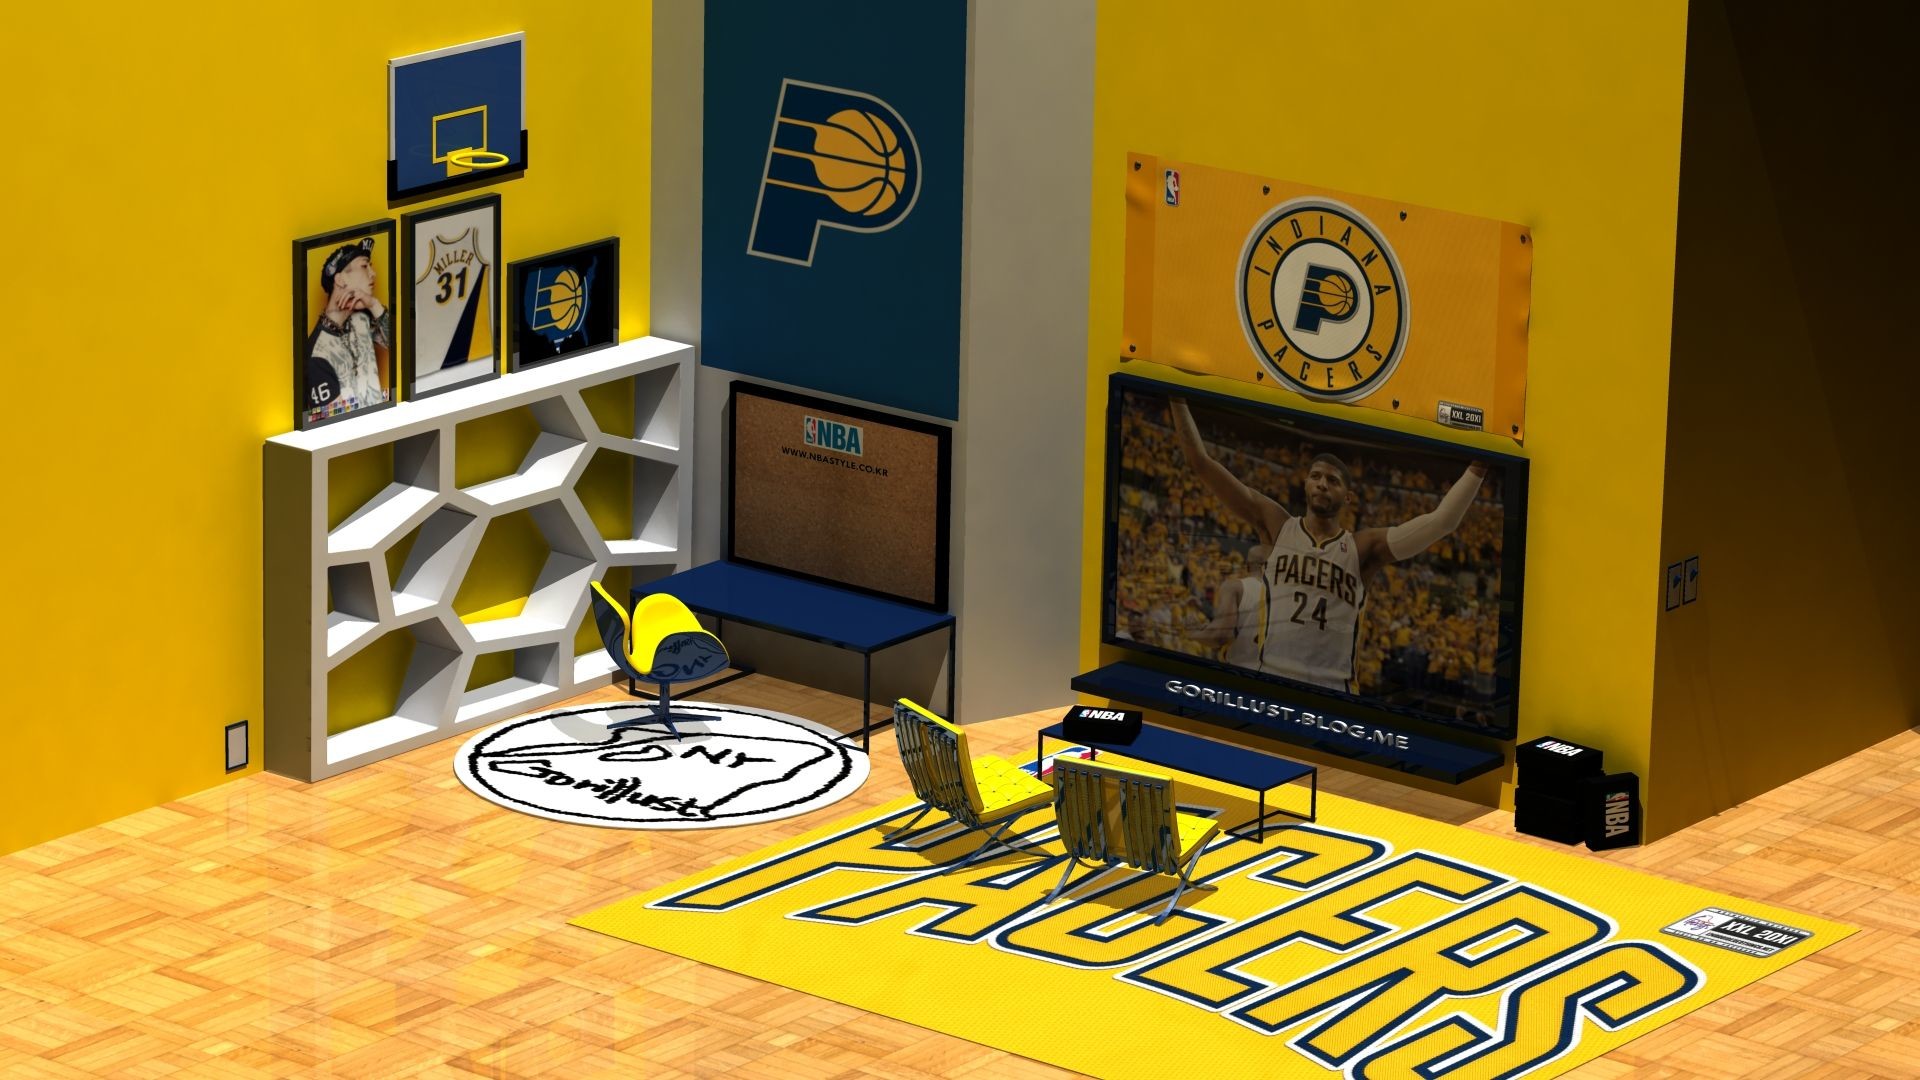 1920x1080 INDIANA PACERS WALLPAPER~!!! Designed by Gorillust